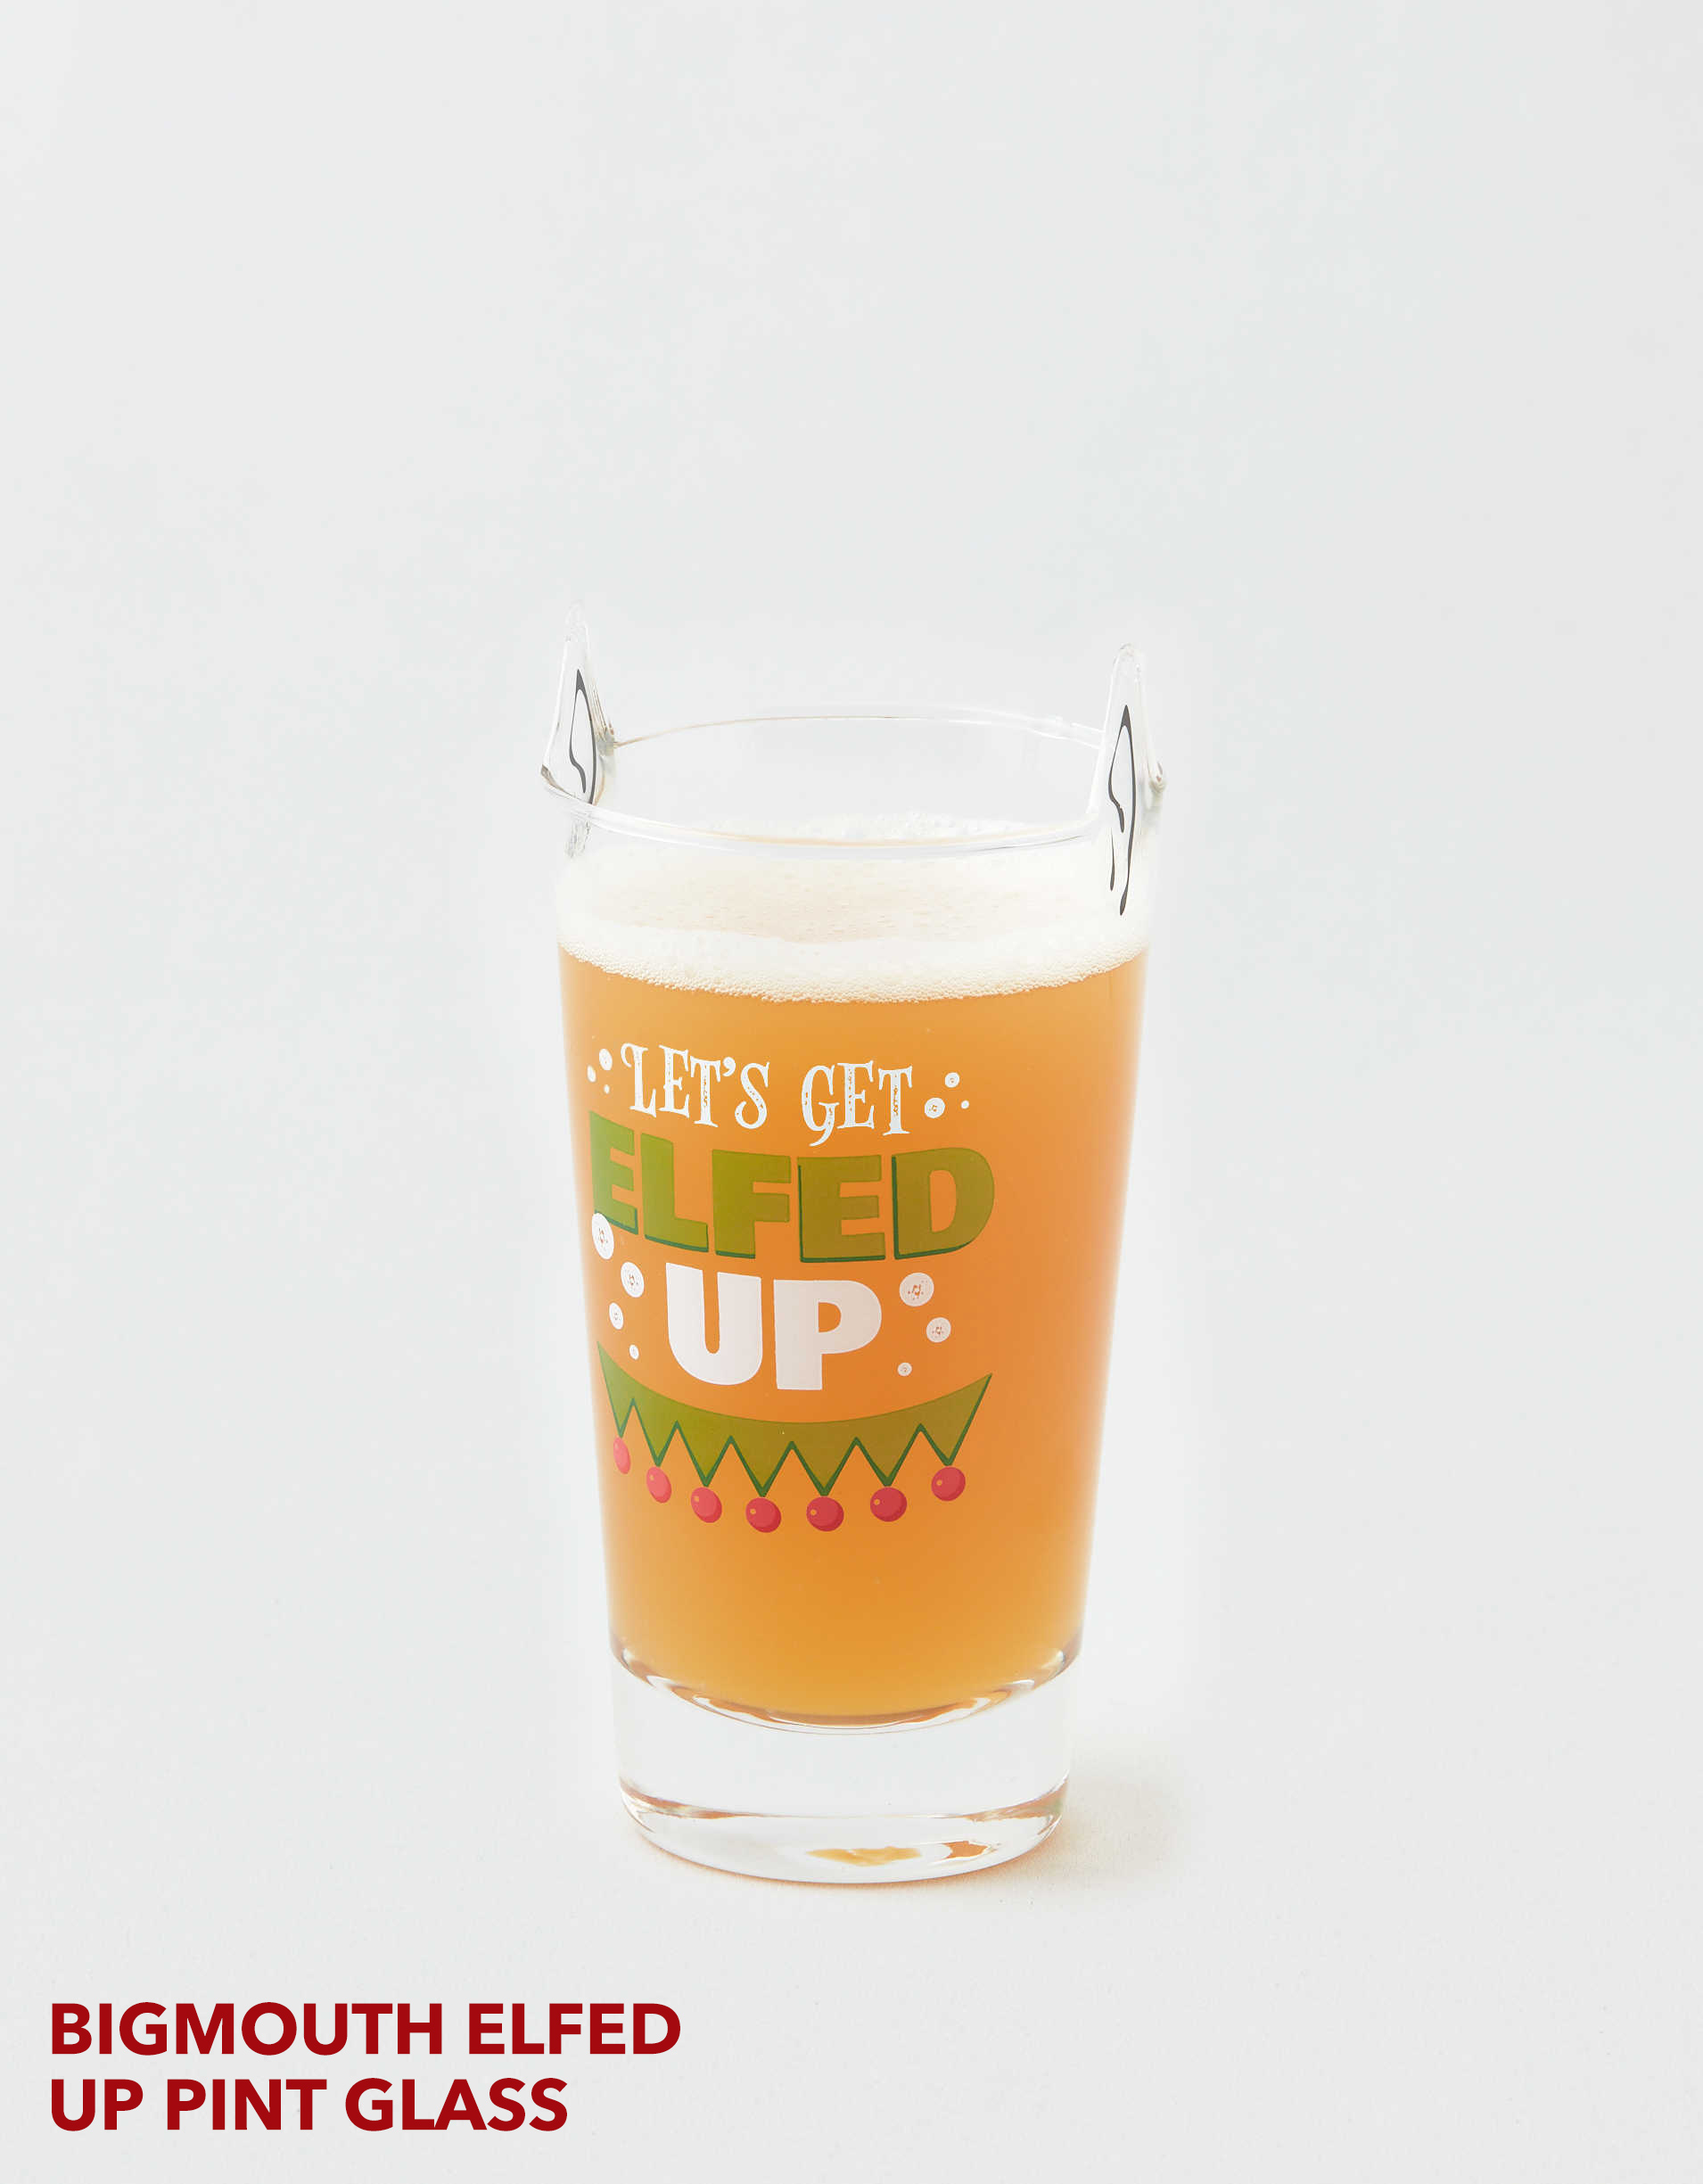 BIGMOUTH ELFED UP PINT GLASS